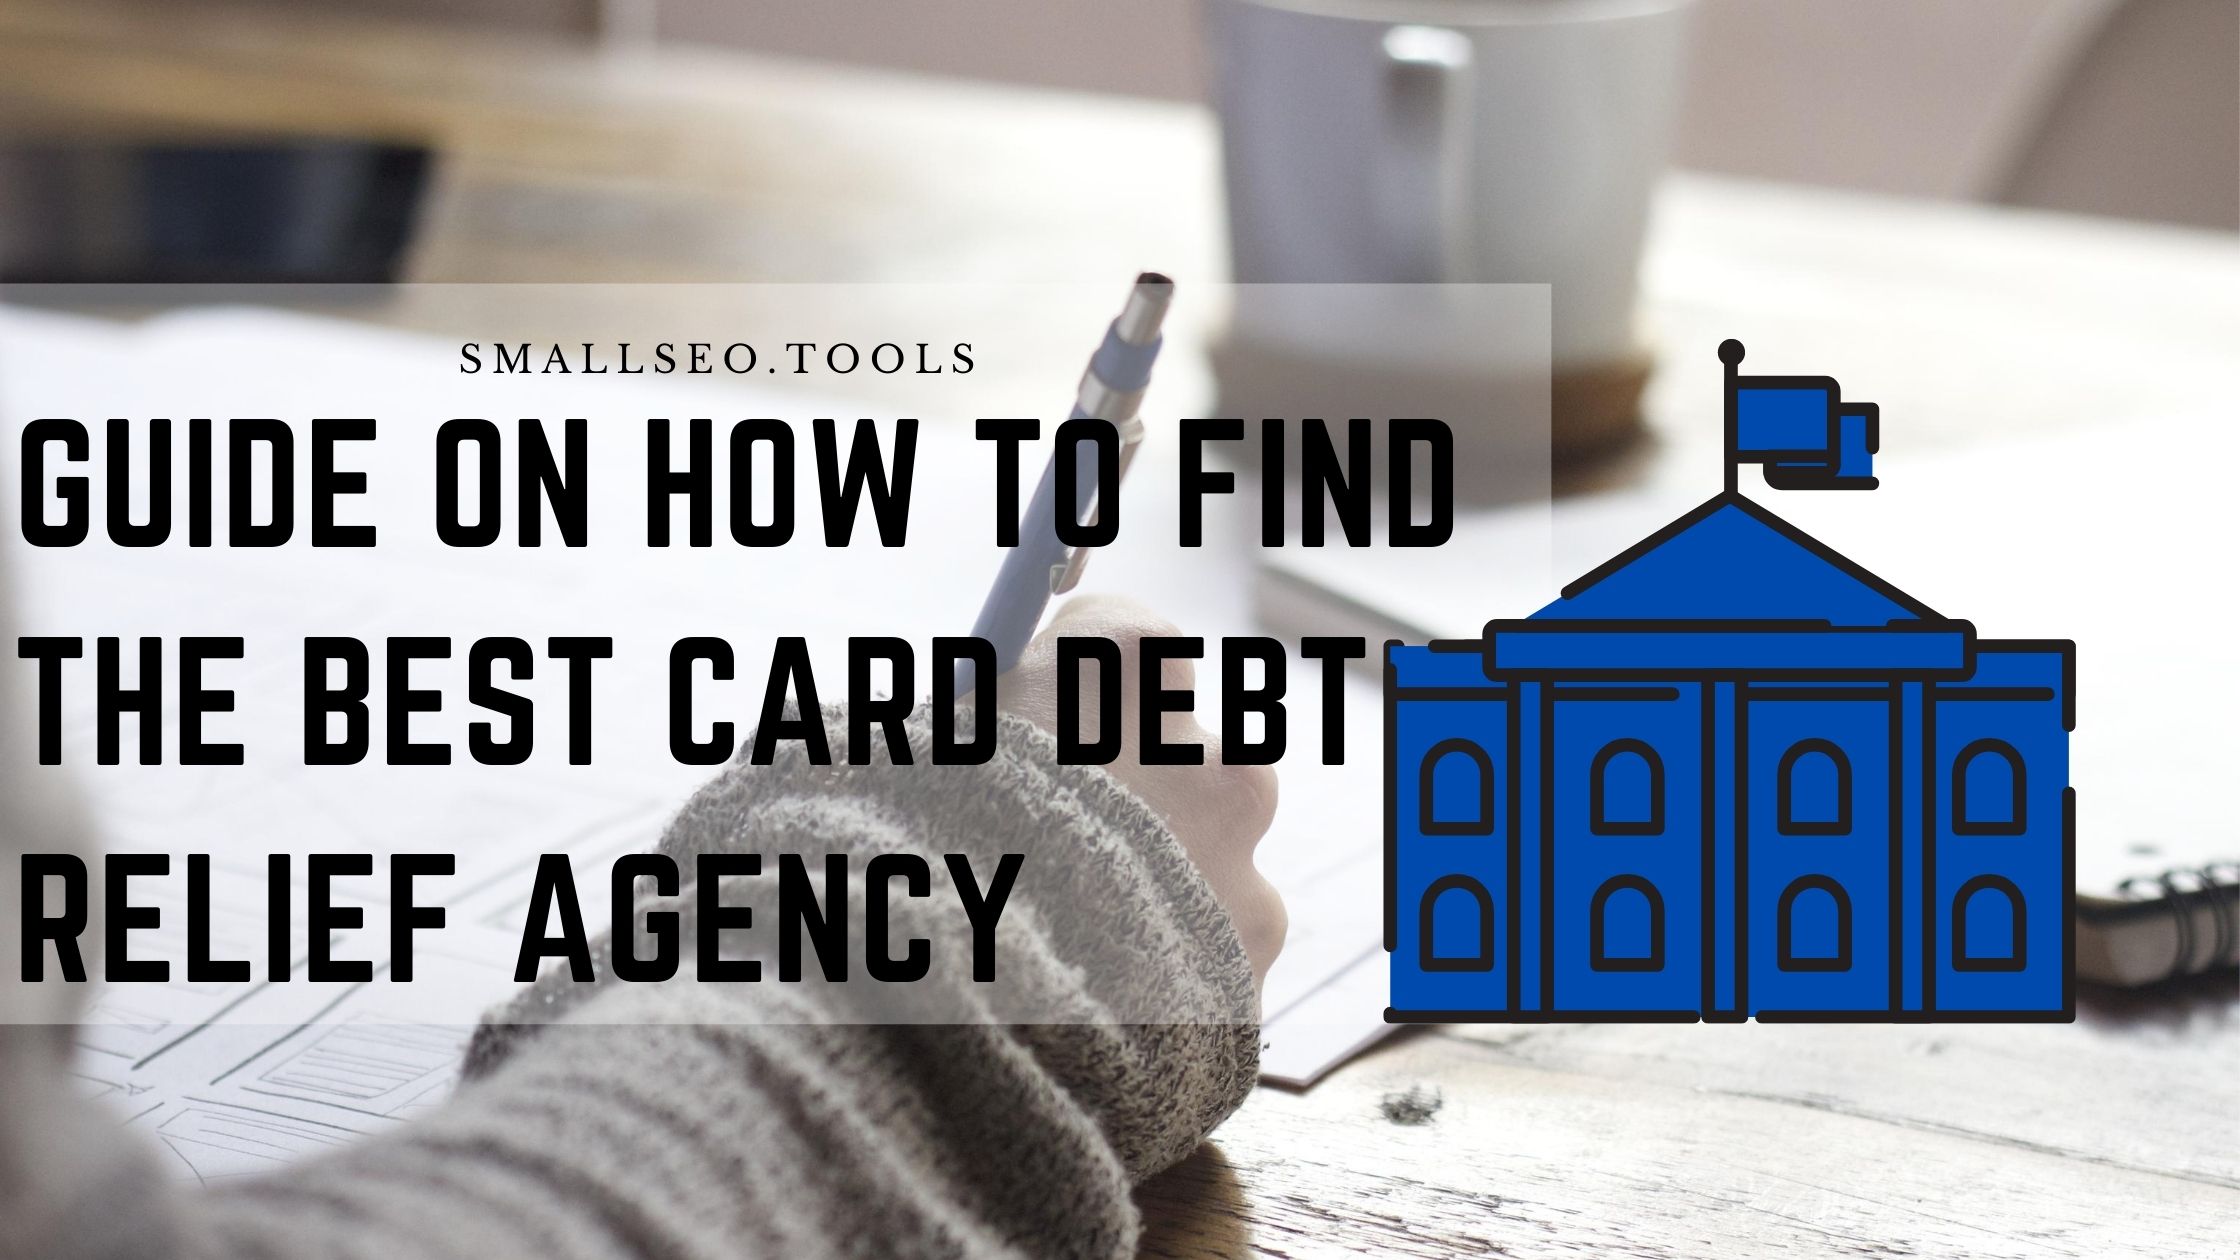 Guide on How to Find the Best Card Debt Relief Agency